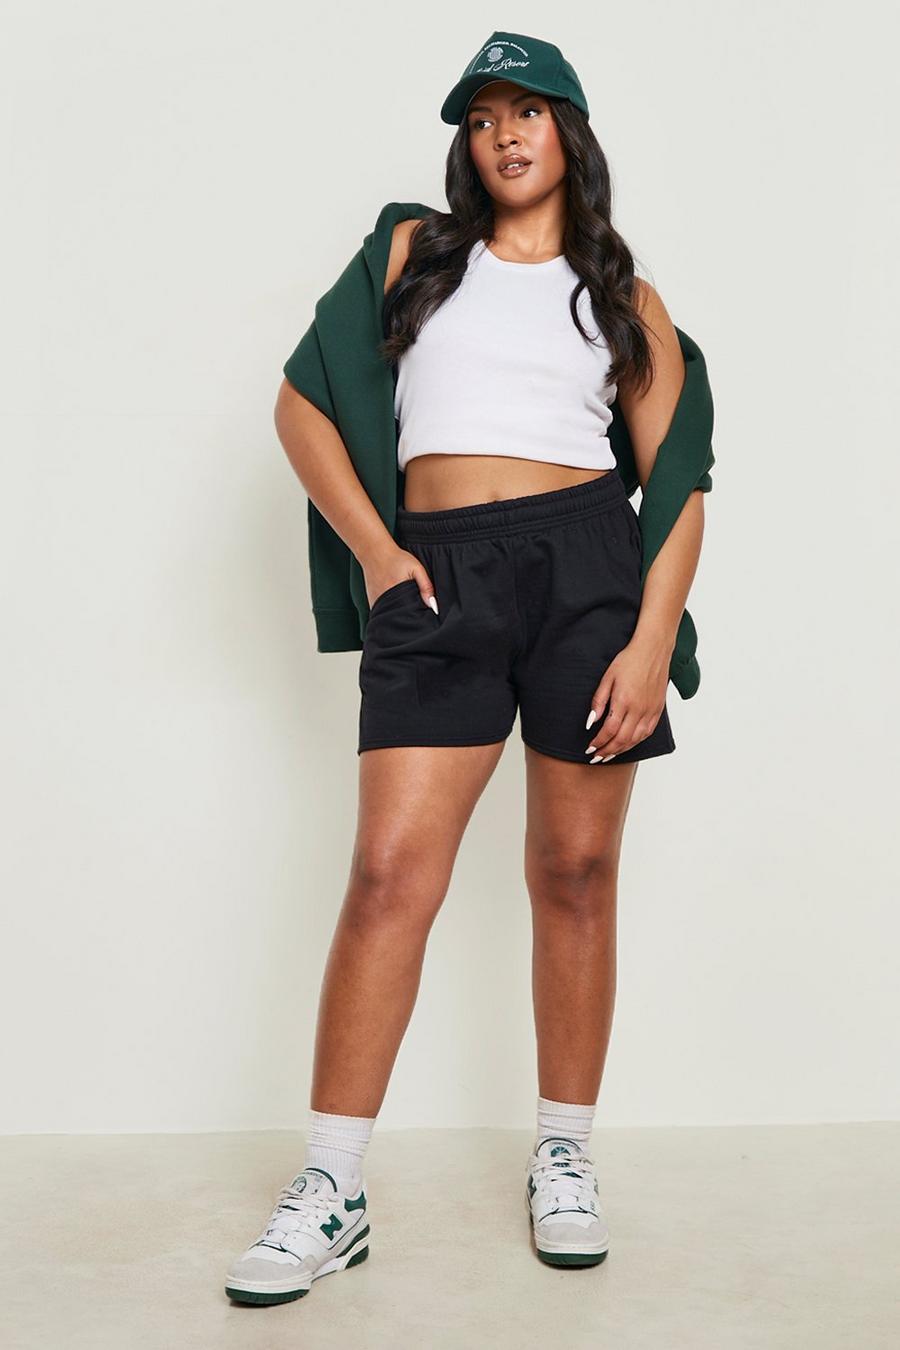 Plus Size Sweat Shorts For Summer